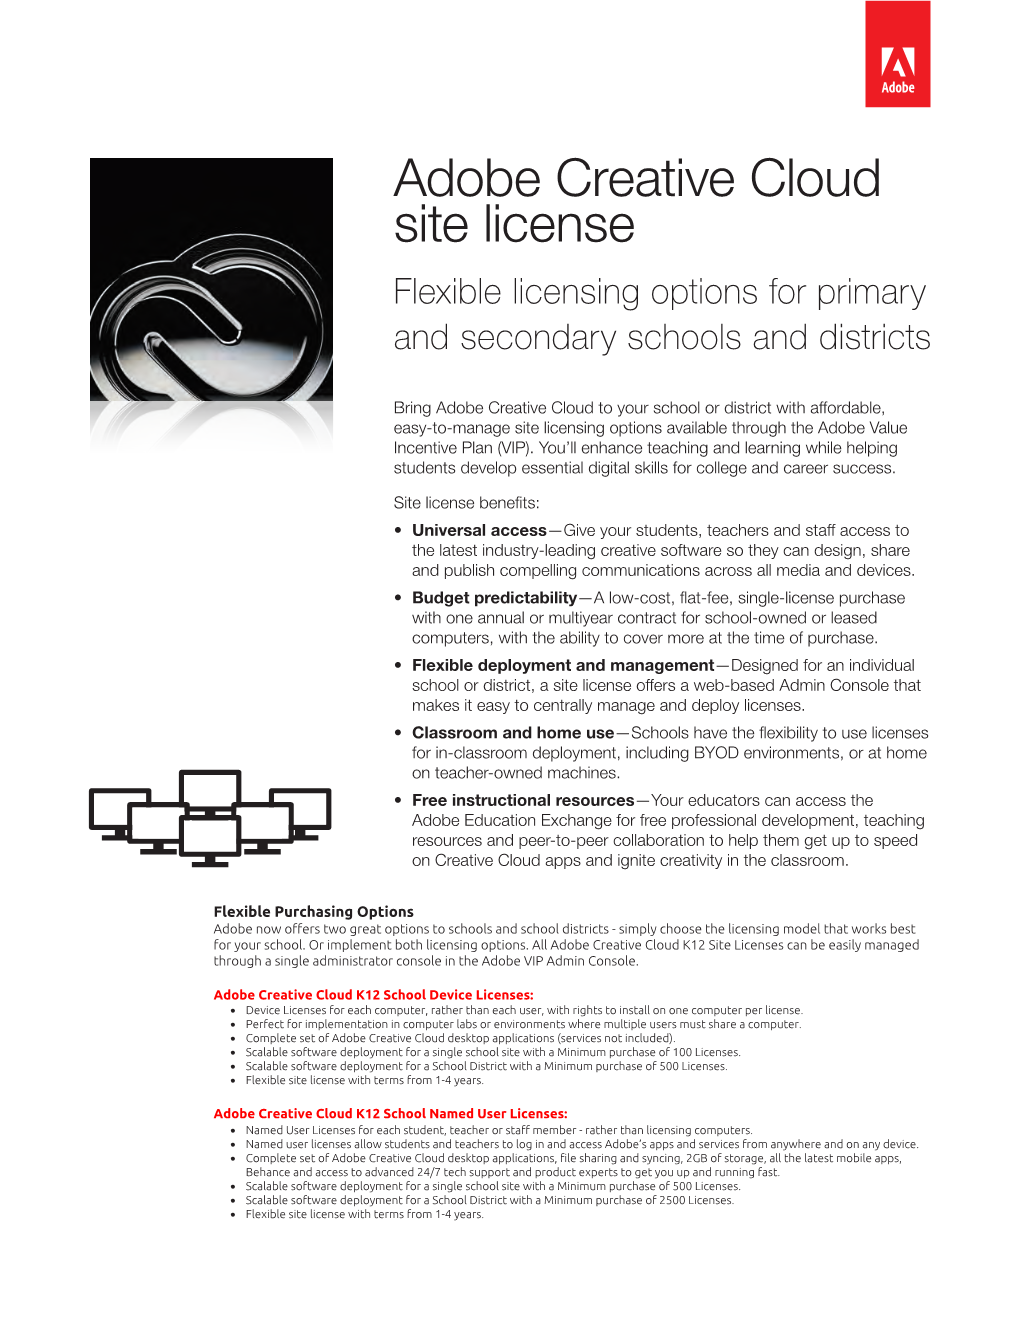 Adobe Creative Cloud Site License Flexible Licensing Options for Primary and Secondary Schools and Districts